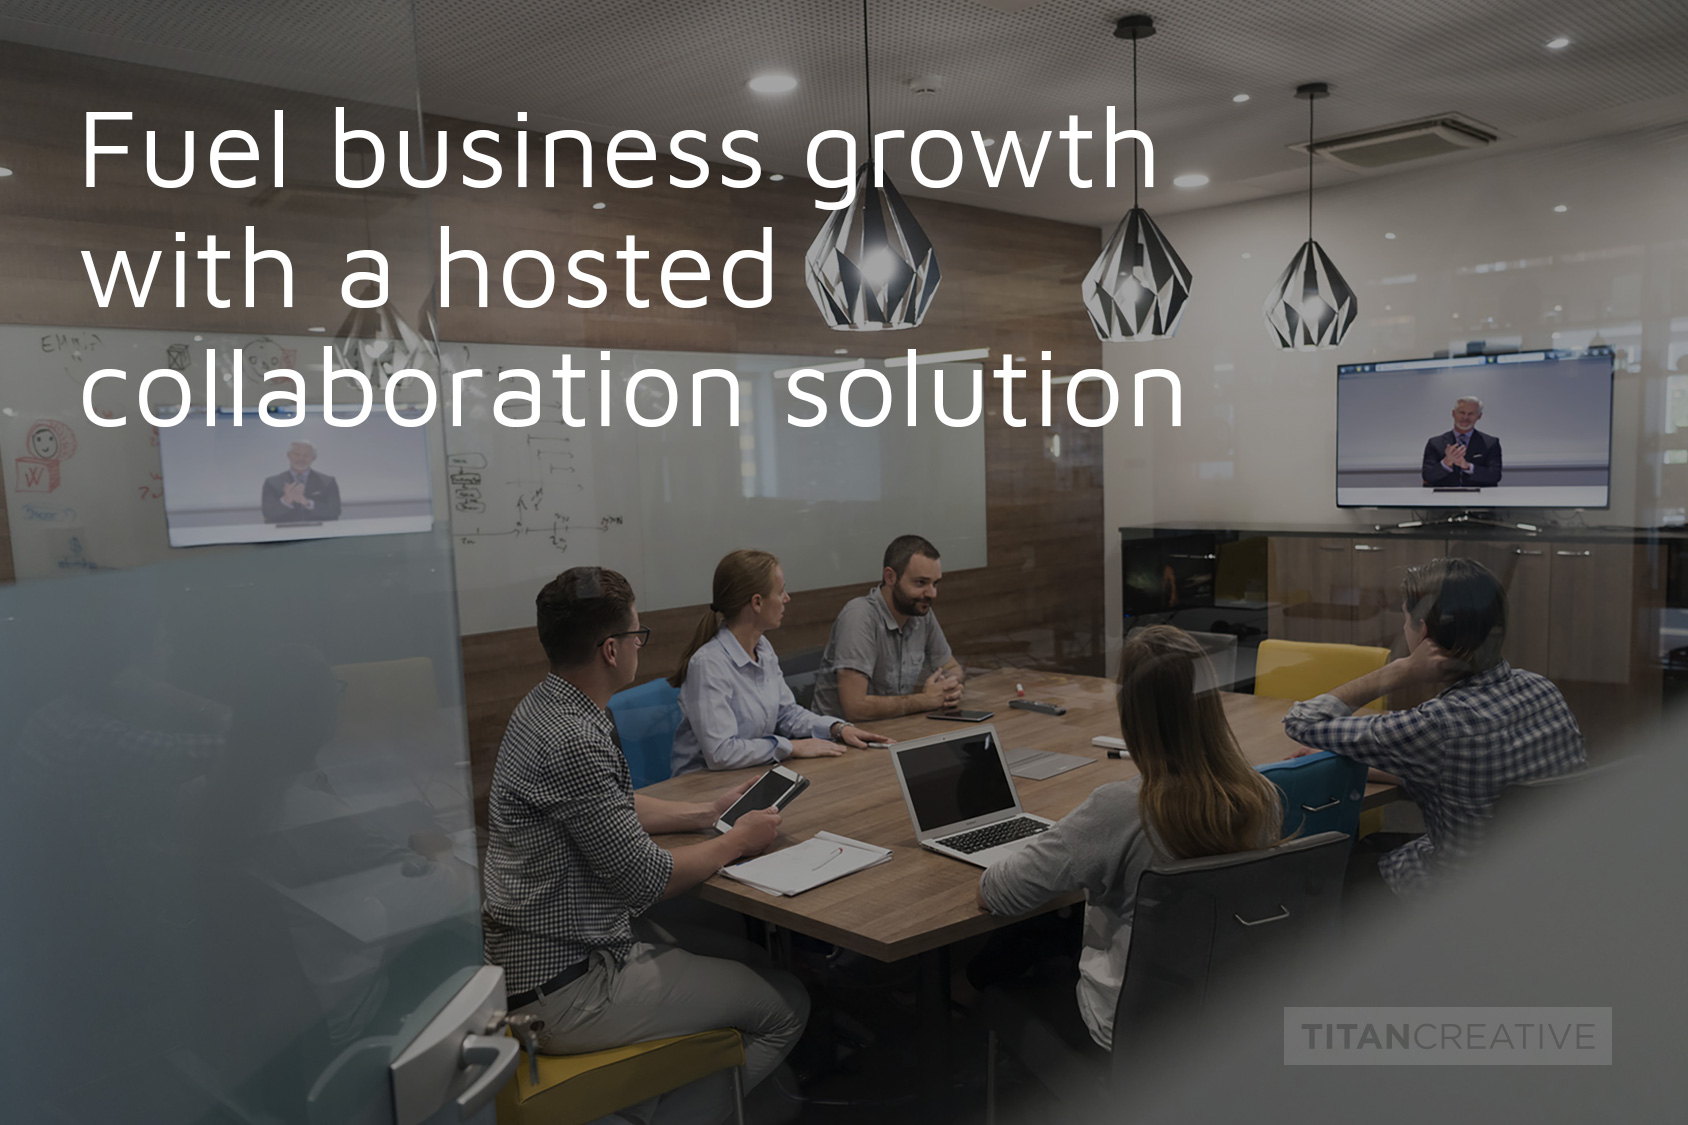 Fuel business growth with a hosted collaboration solution